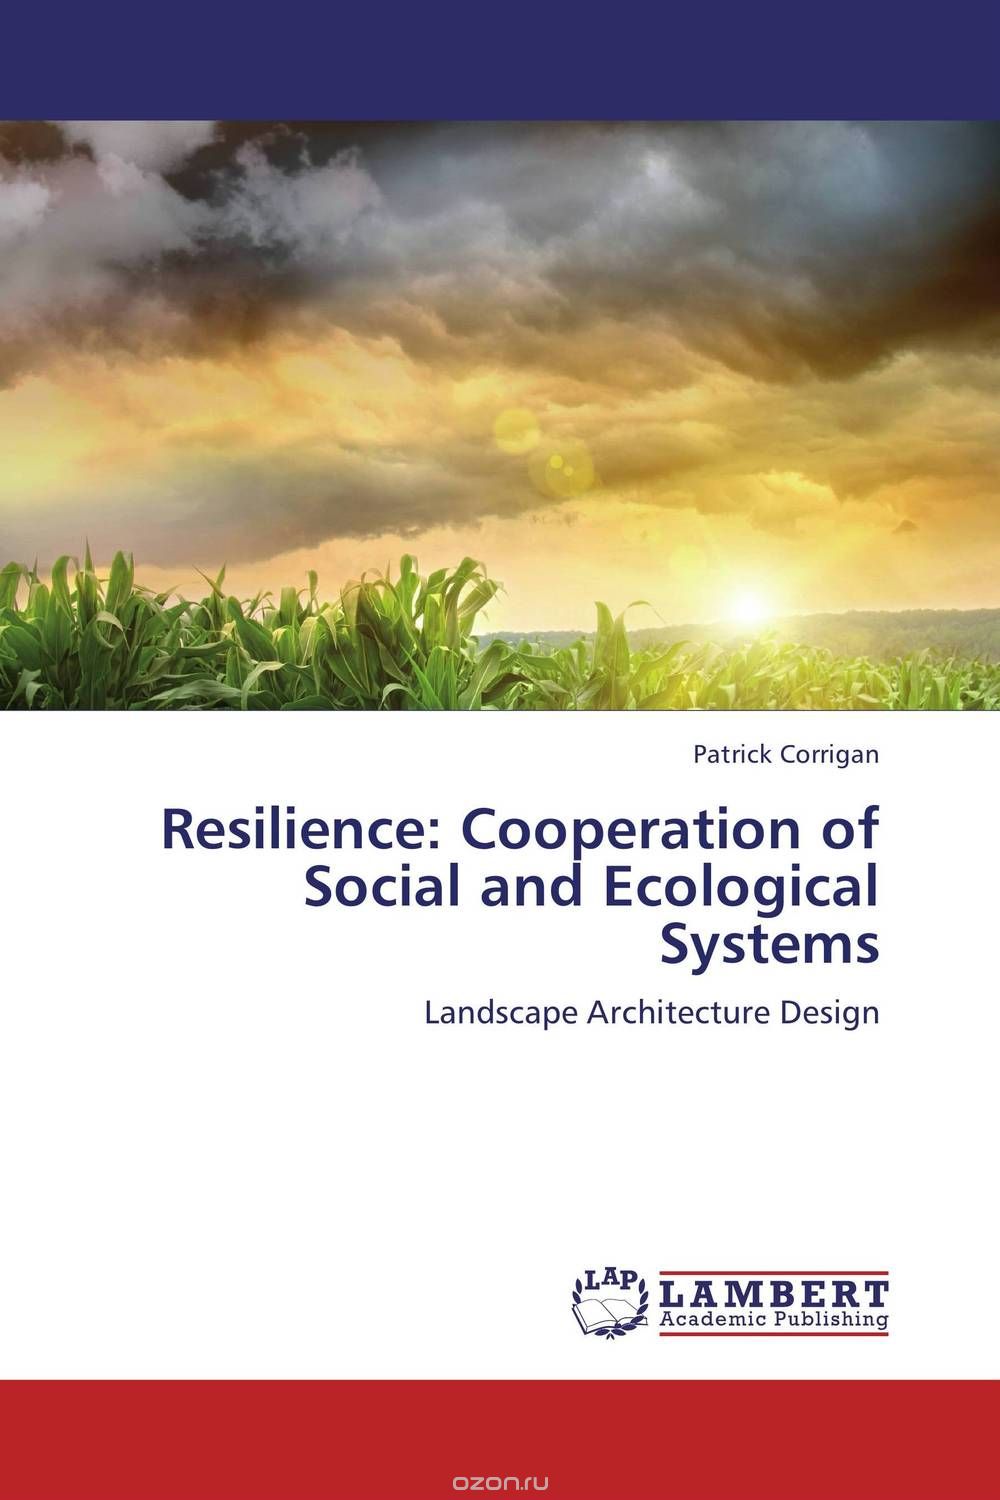 Resilience: Cooperation of Social and Ecological Systems